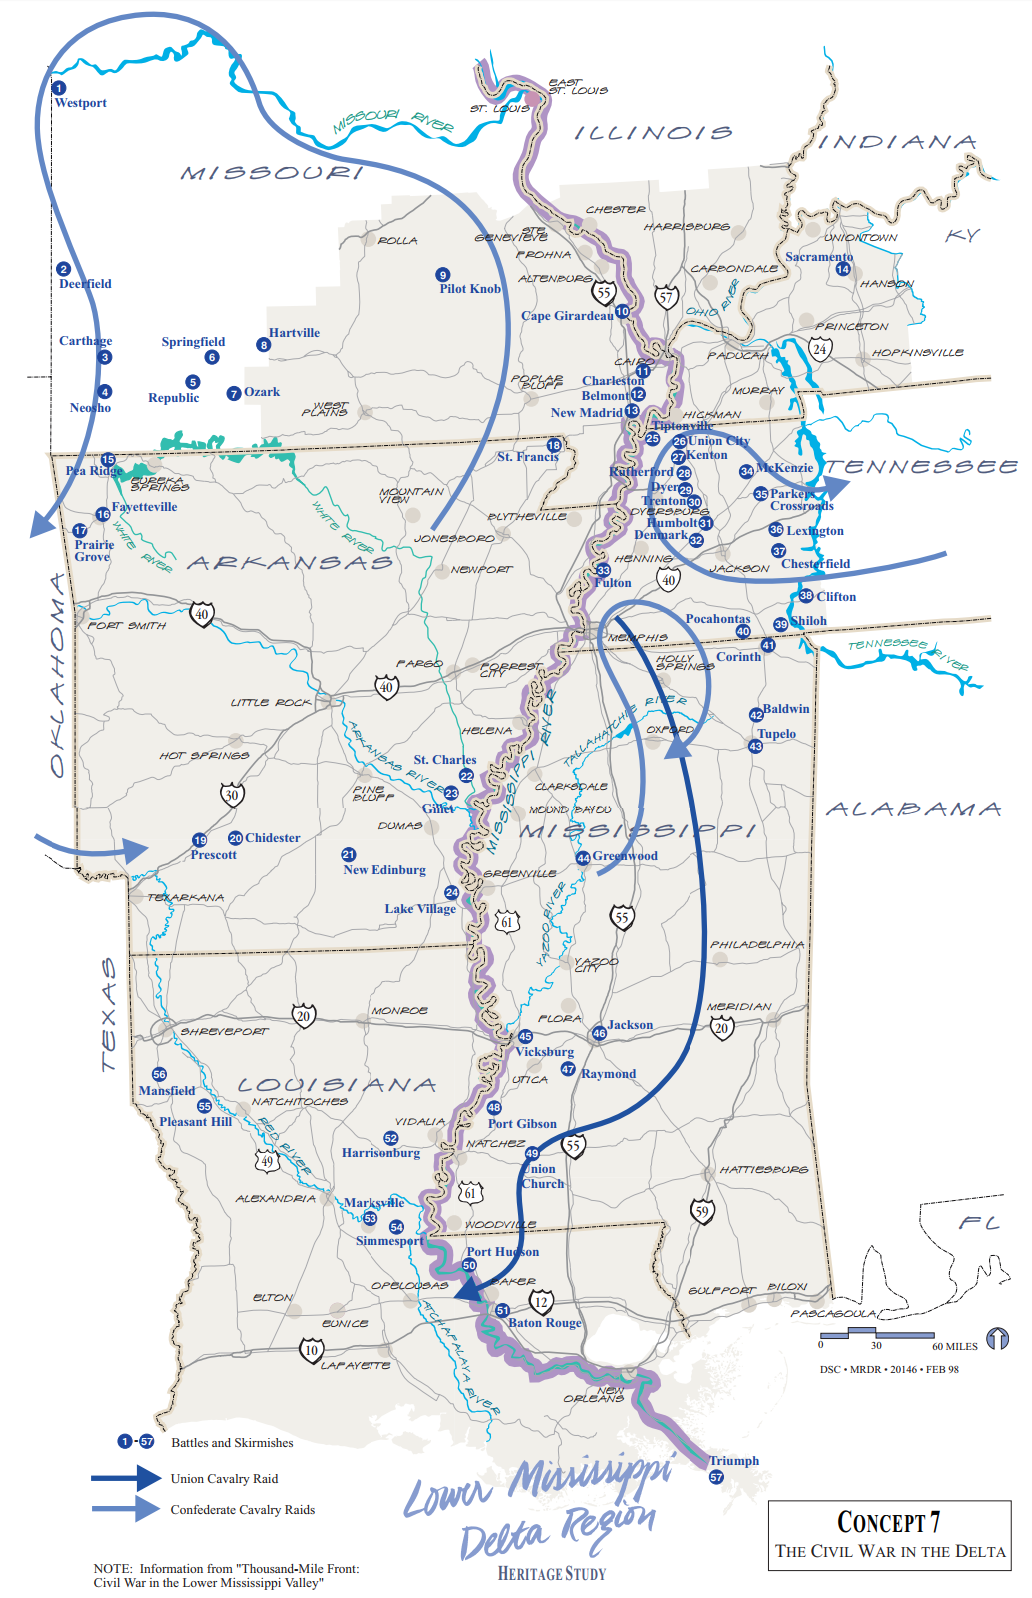 Map of Civil War sites in the Lower Mississippi Delta Region